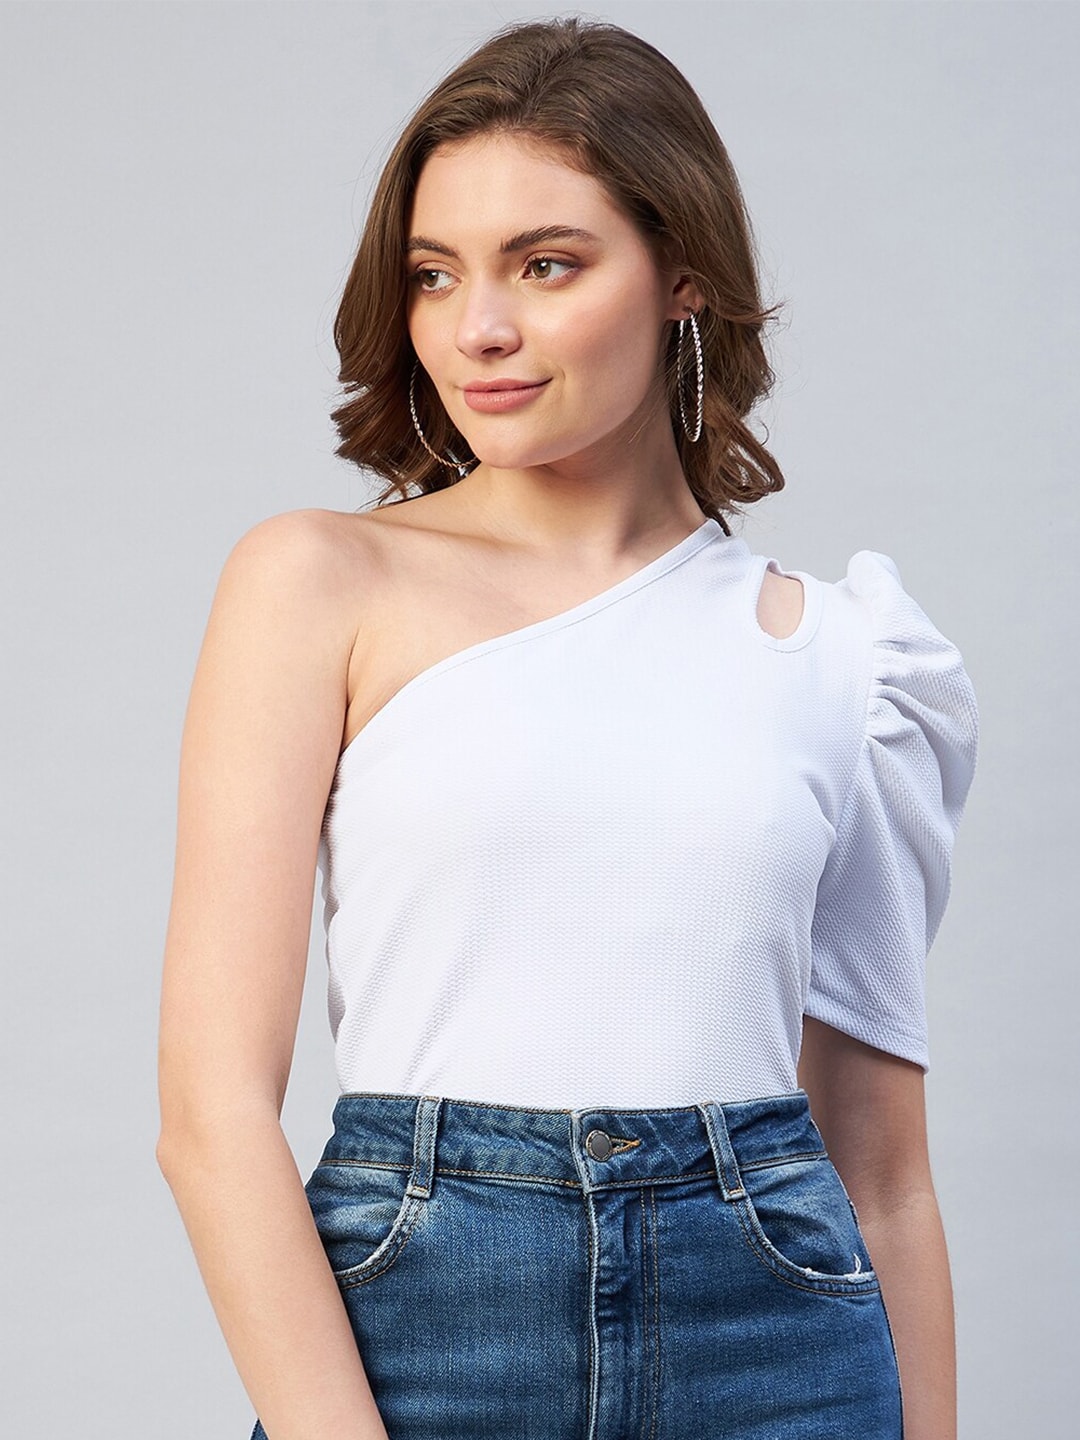 Marie Claire White One Shoulder Top Price in India